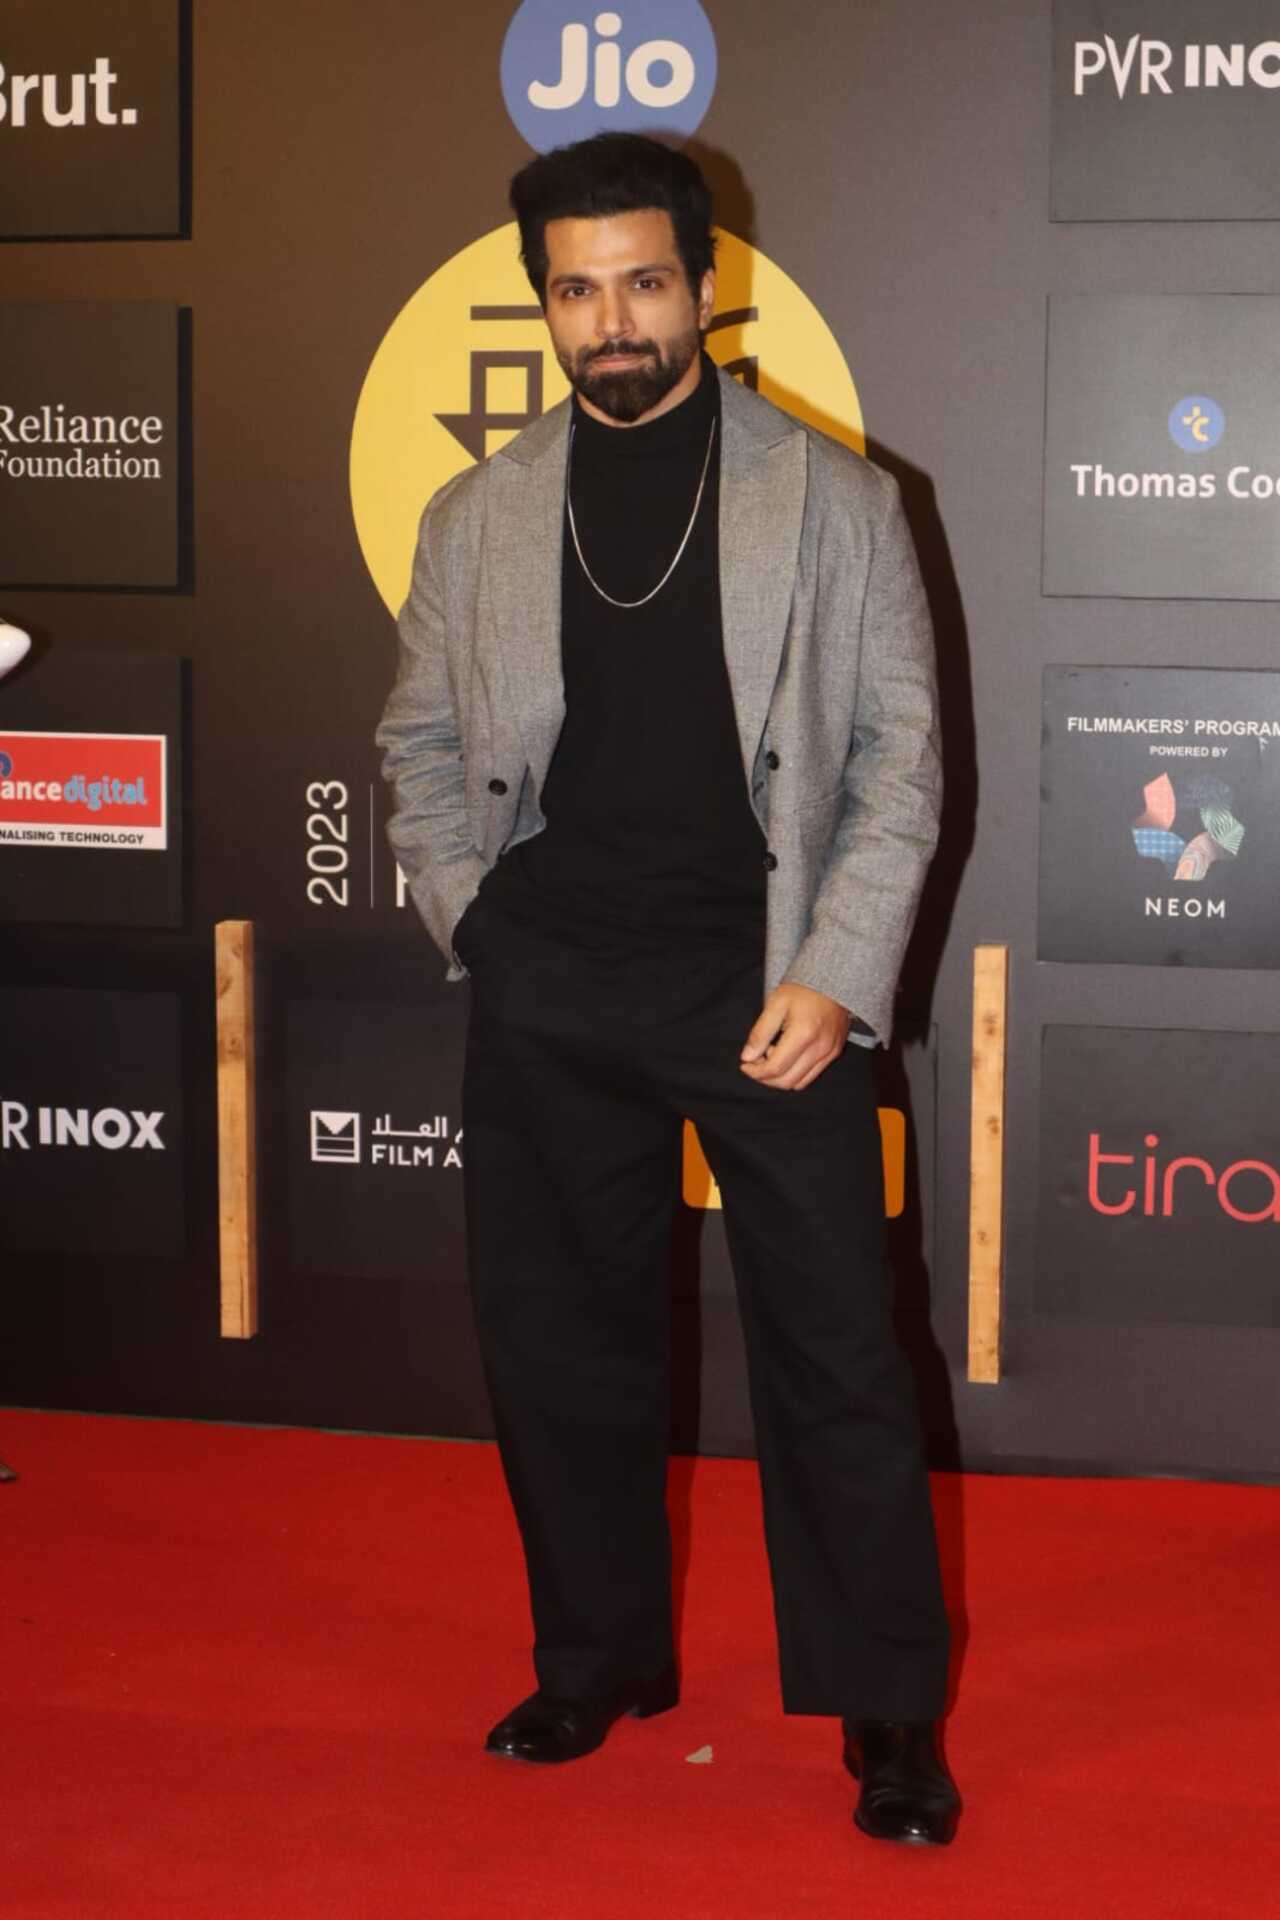 Rithvik Dhanjani looked dapper in black turtle neck t-shirt, loose trousers and a grey blazer